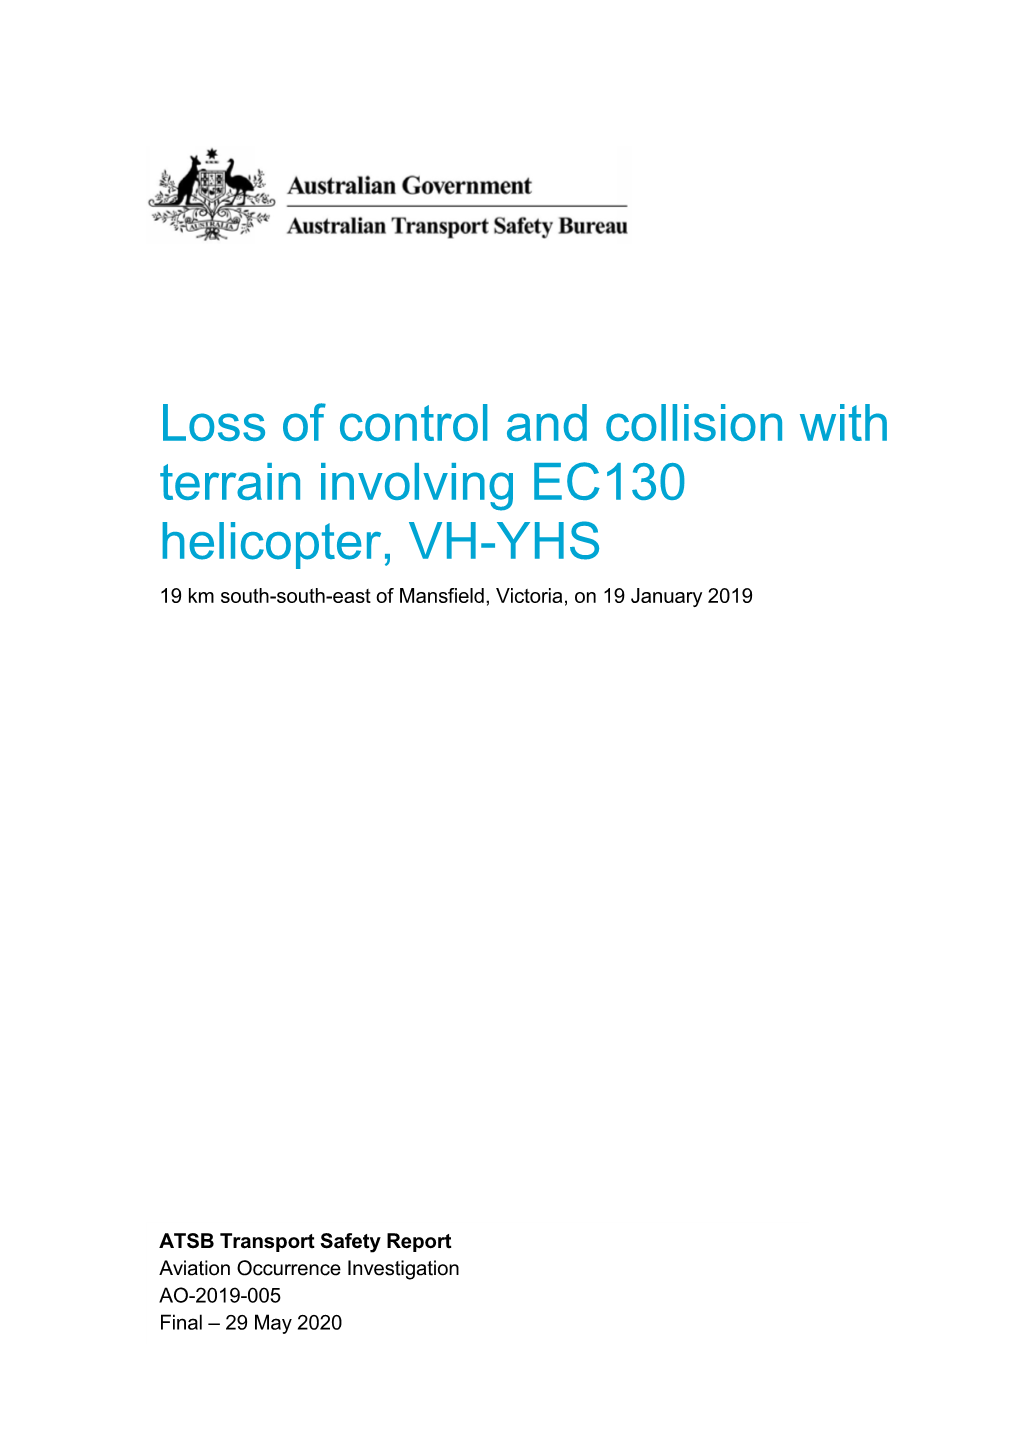 Loss of Control and Collision with Terrain Involving EC130 Helicopter, VH-YHS 19 Km South-South-East of Mansfield, Victoria, on 19 January 2019